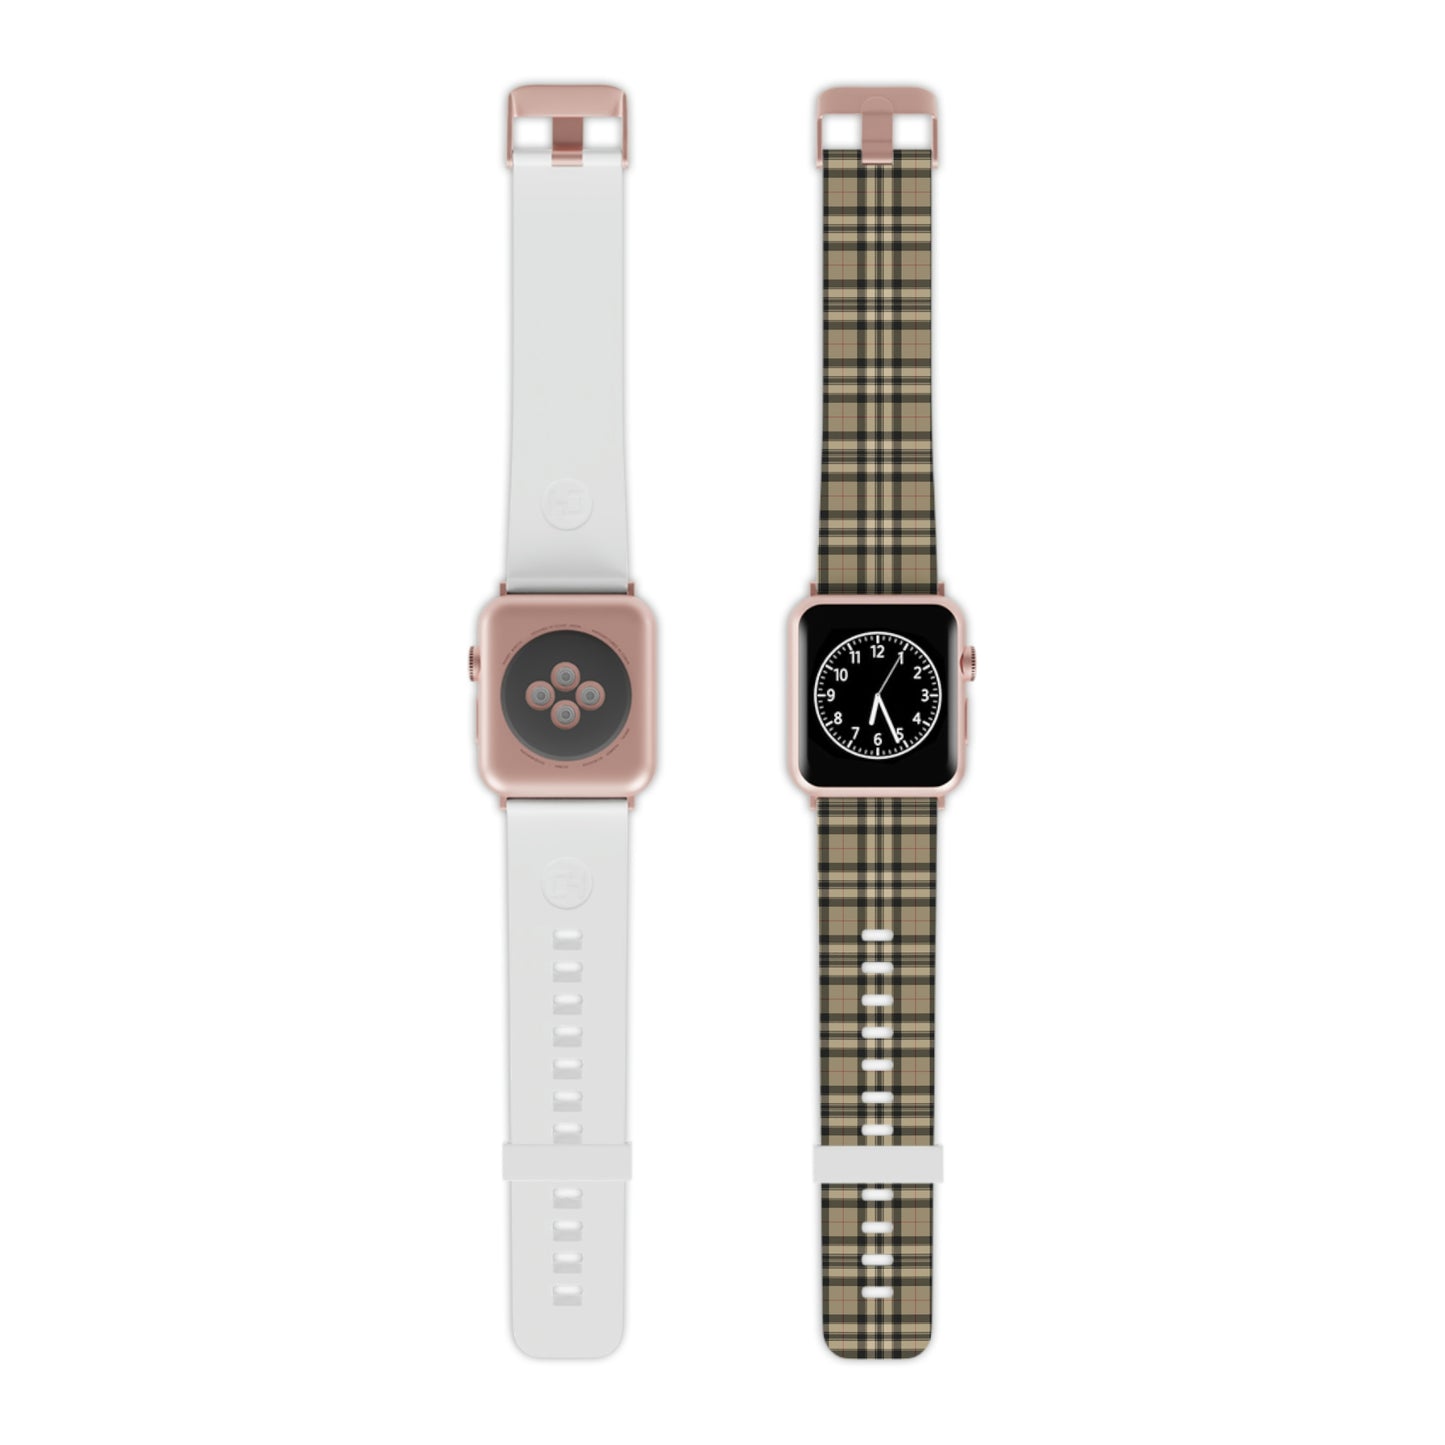 Tan and Black Plaid Thermo Elastomer Watch Band for Apple Watch